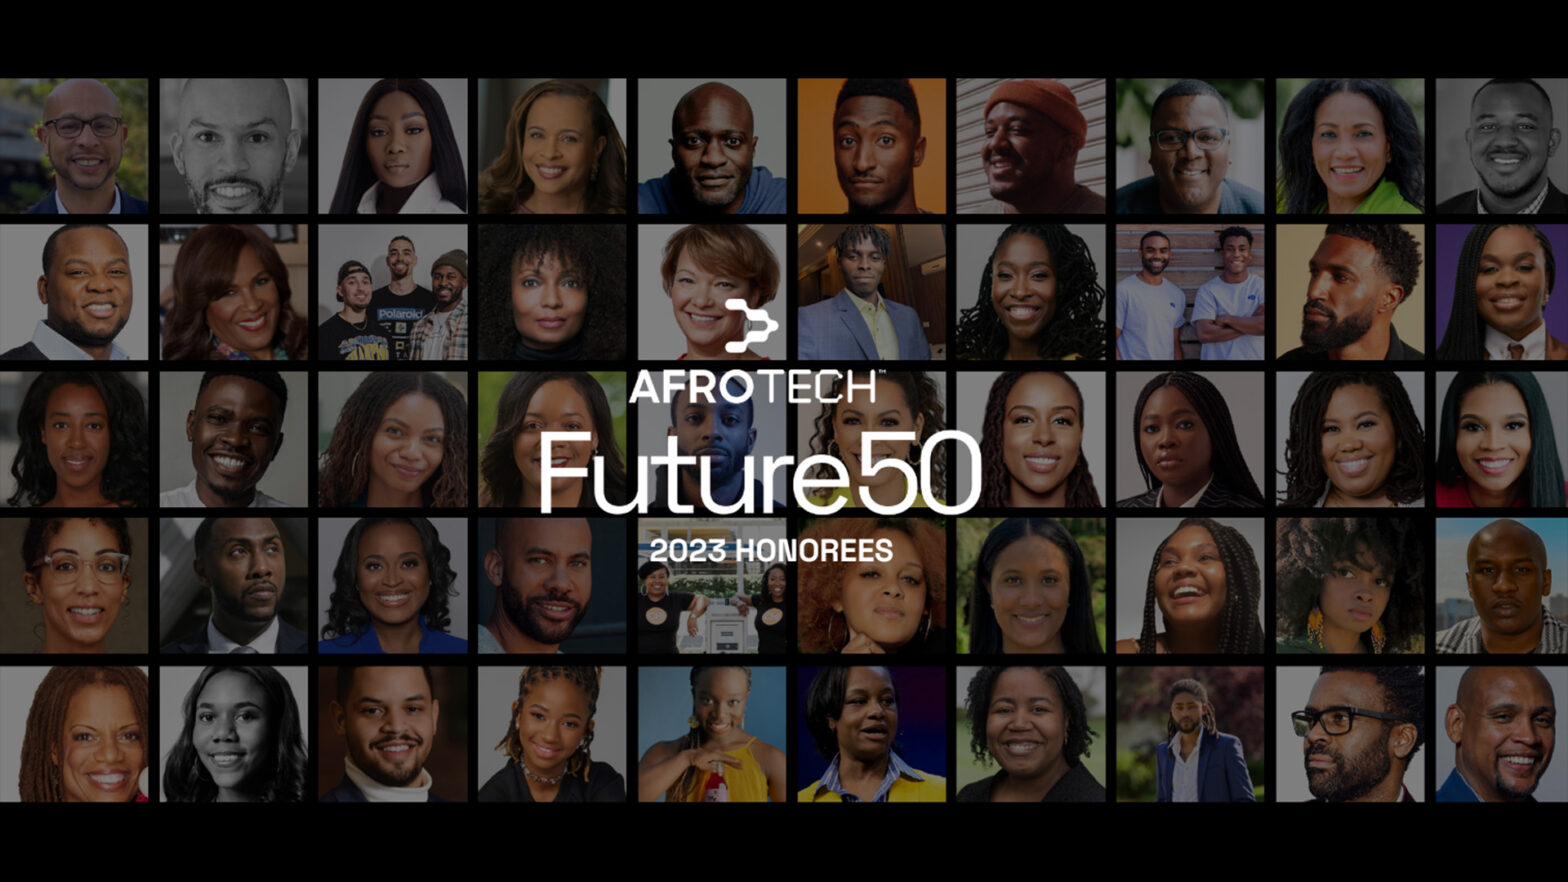 We're Back And Bigger The AFROTECH™ Future 50 Honorees For 2023 Are In